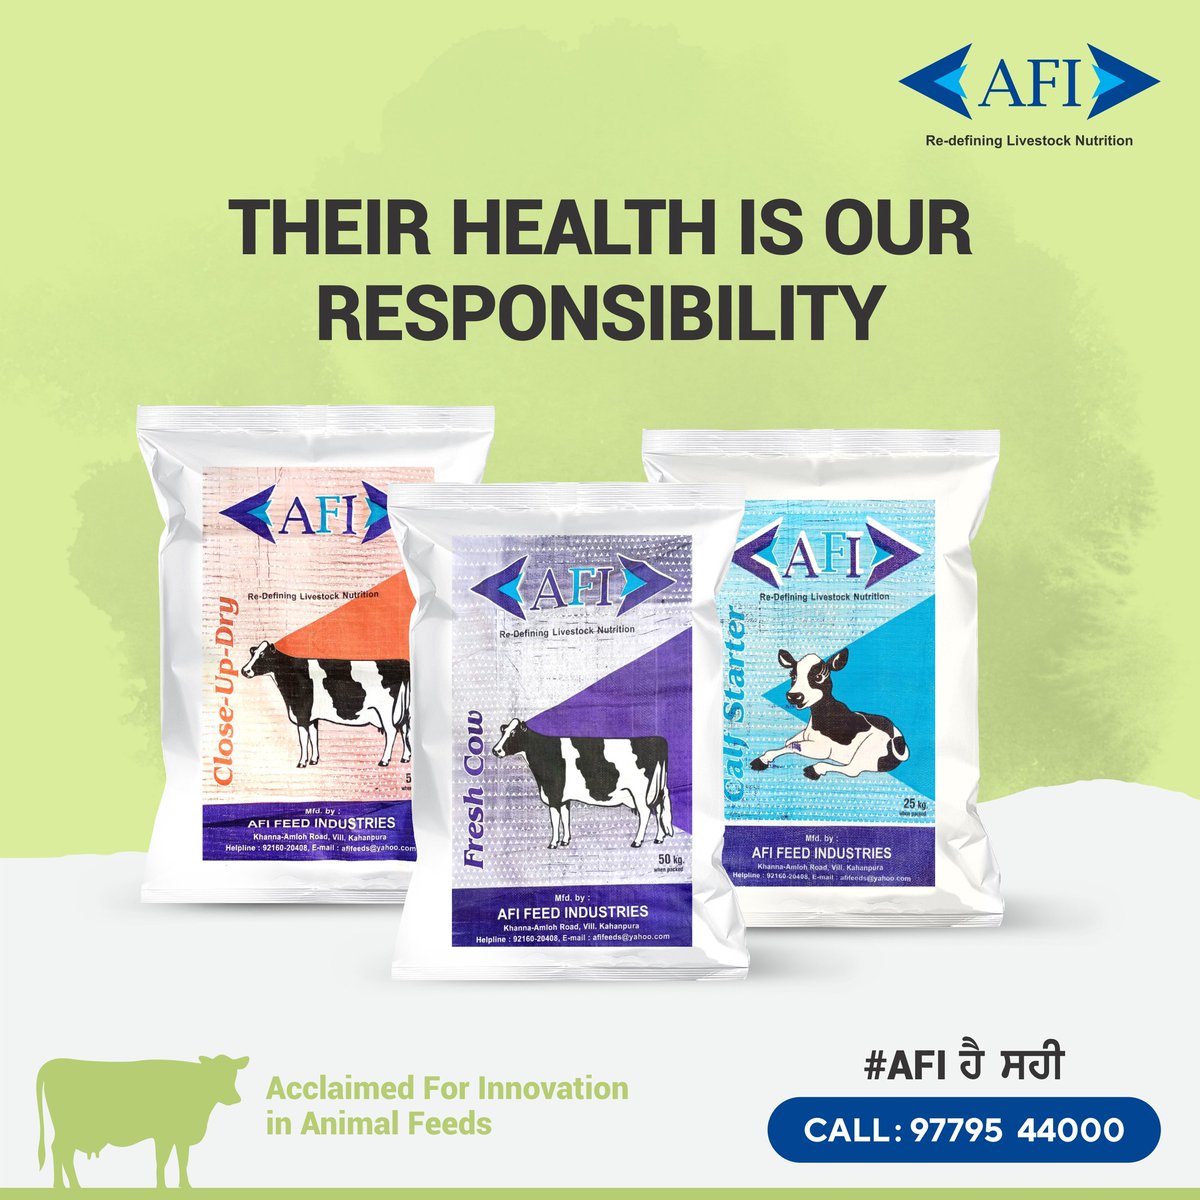 Your livestock is as healthy as the feed gets; nurture it with AFI. Animals are healthy when they are safe!
For more information, call - 09779544000

#Dairy #Feed #CattleFeed #AnimalFeed #AnimalNutrition #Farming #IndianDairyFarmer #DairyIndustry #DairyFarmer #DairyFarming #Milk